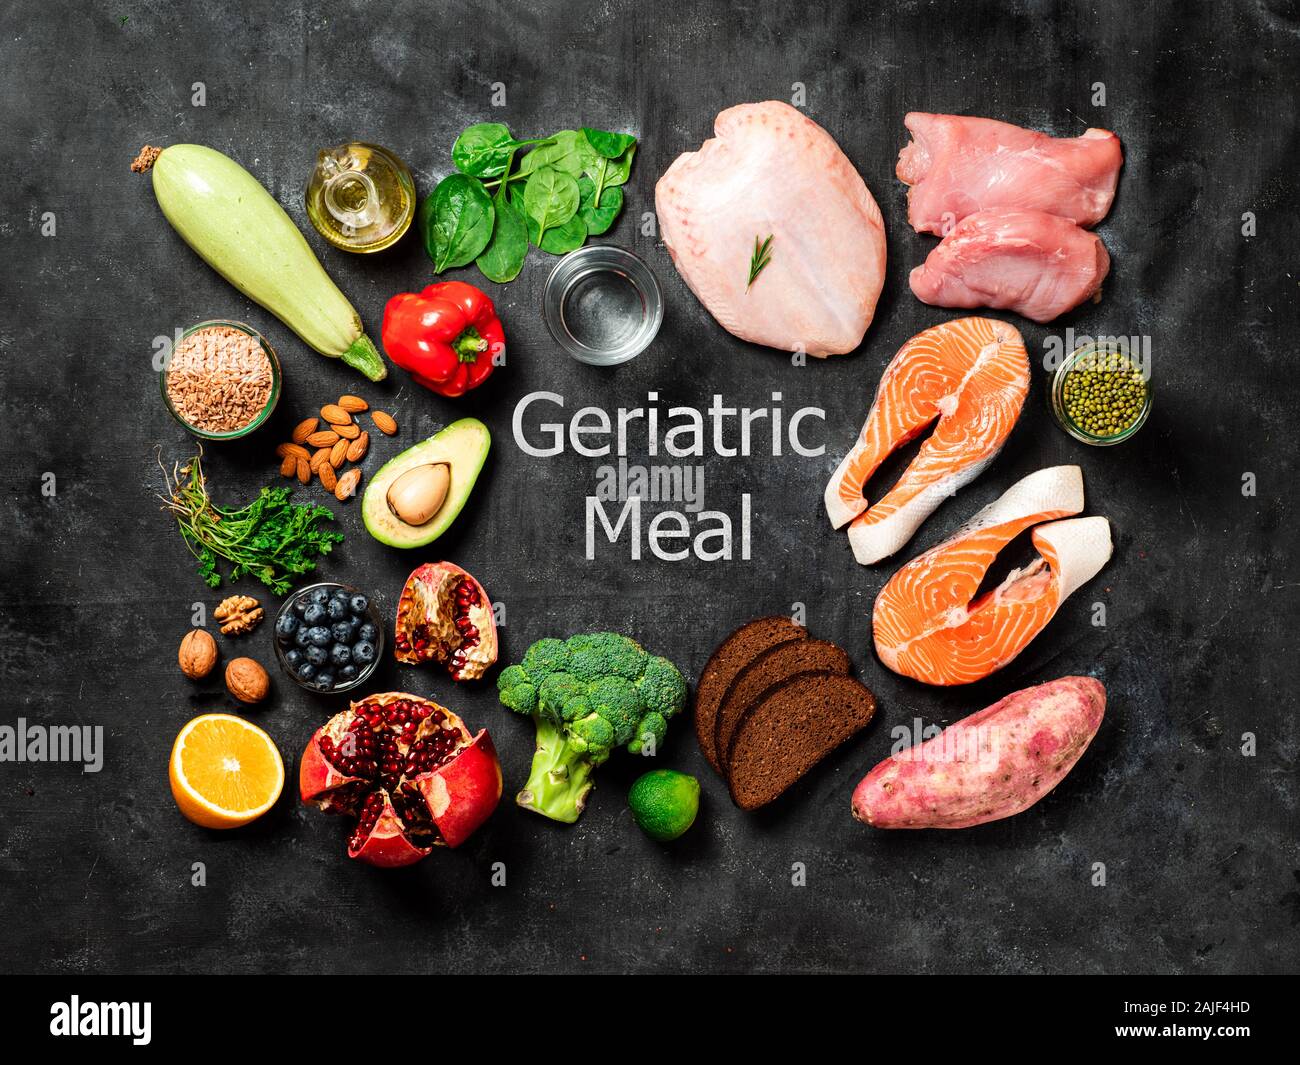 Geriatric Meal Plan or menu concept. Different food ingredients for Anti-age meal plan on dark background. Top view or flat lay. Stock Photo